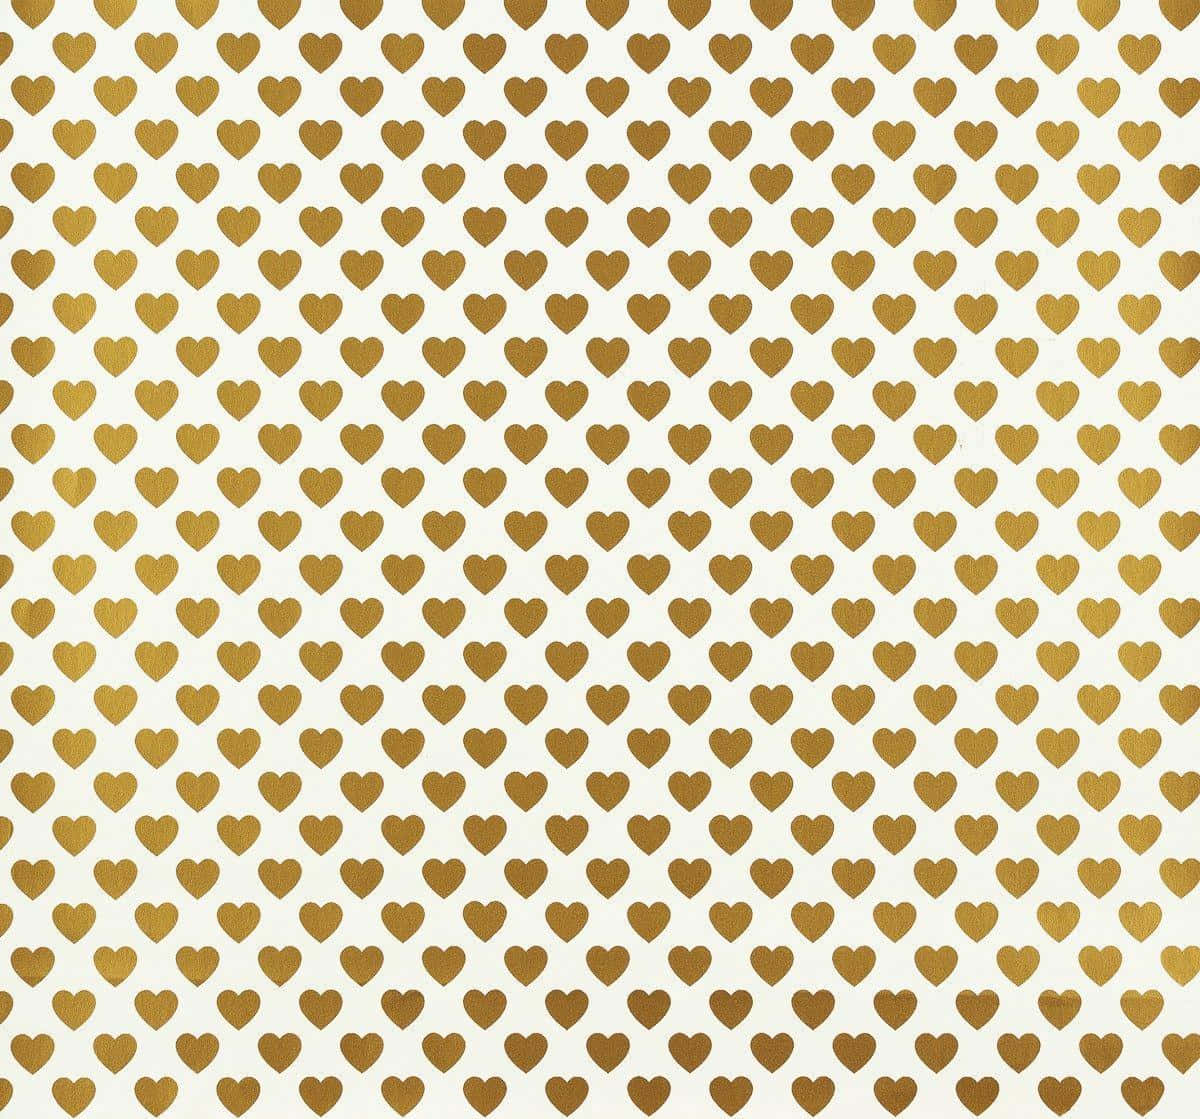 Elegance in Gold - The White Gold Wallpaper